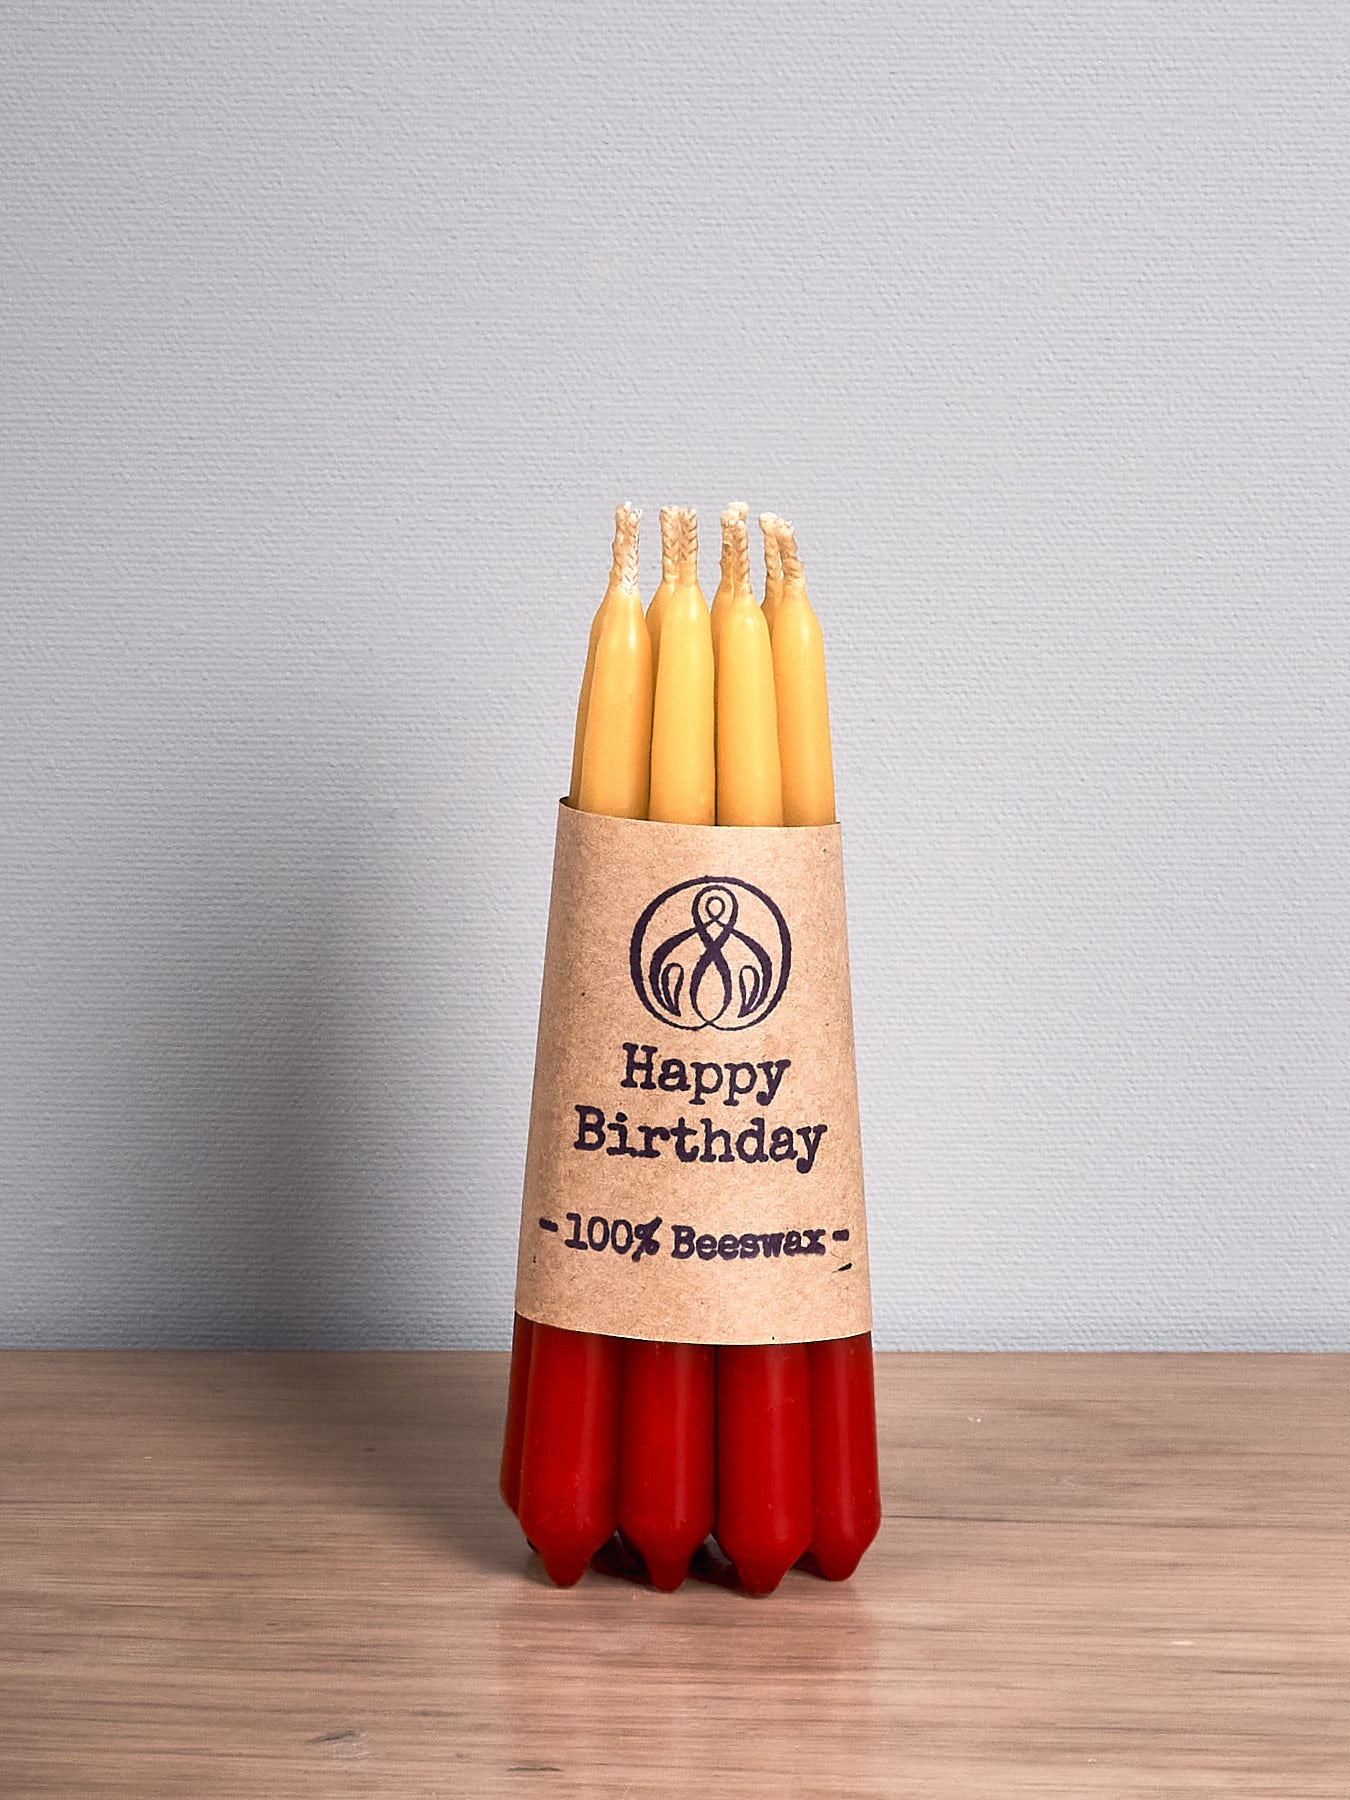 A Hohepa Candles Birthday Candles Set - Red, Orange & Yellow on a wooden table.